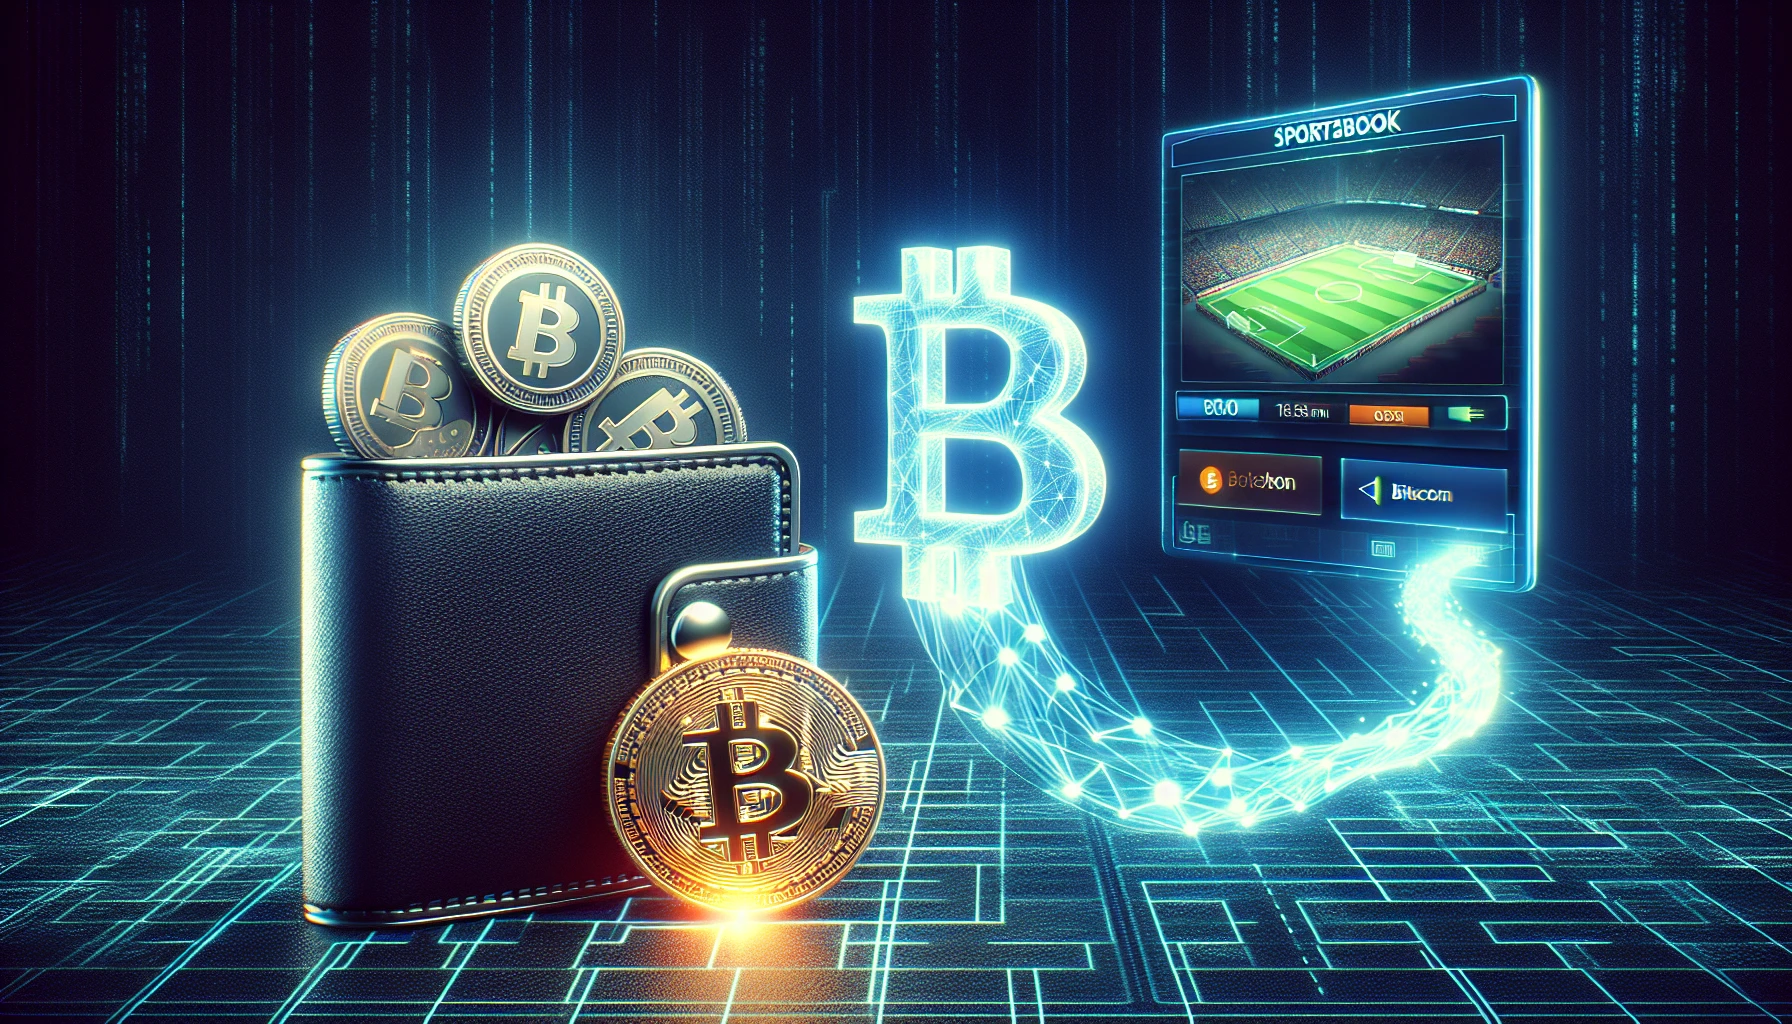 Bitcoin sportsbook deposits and withdrawals